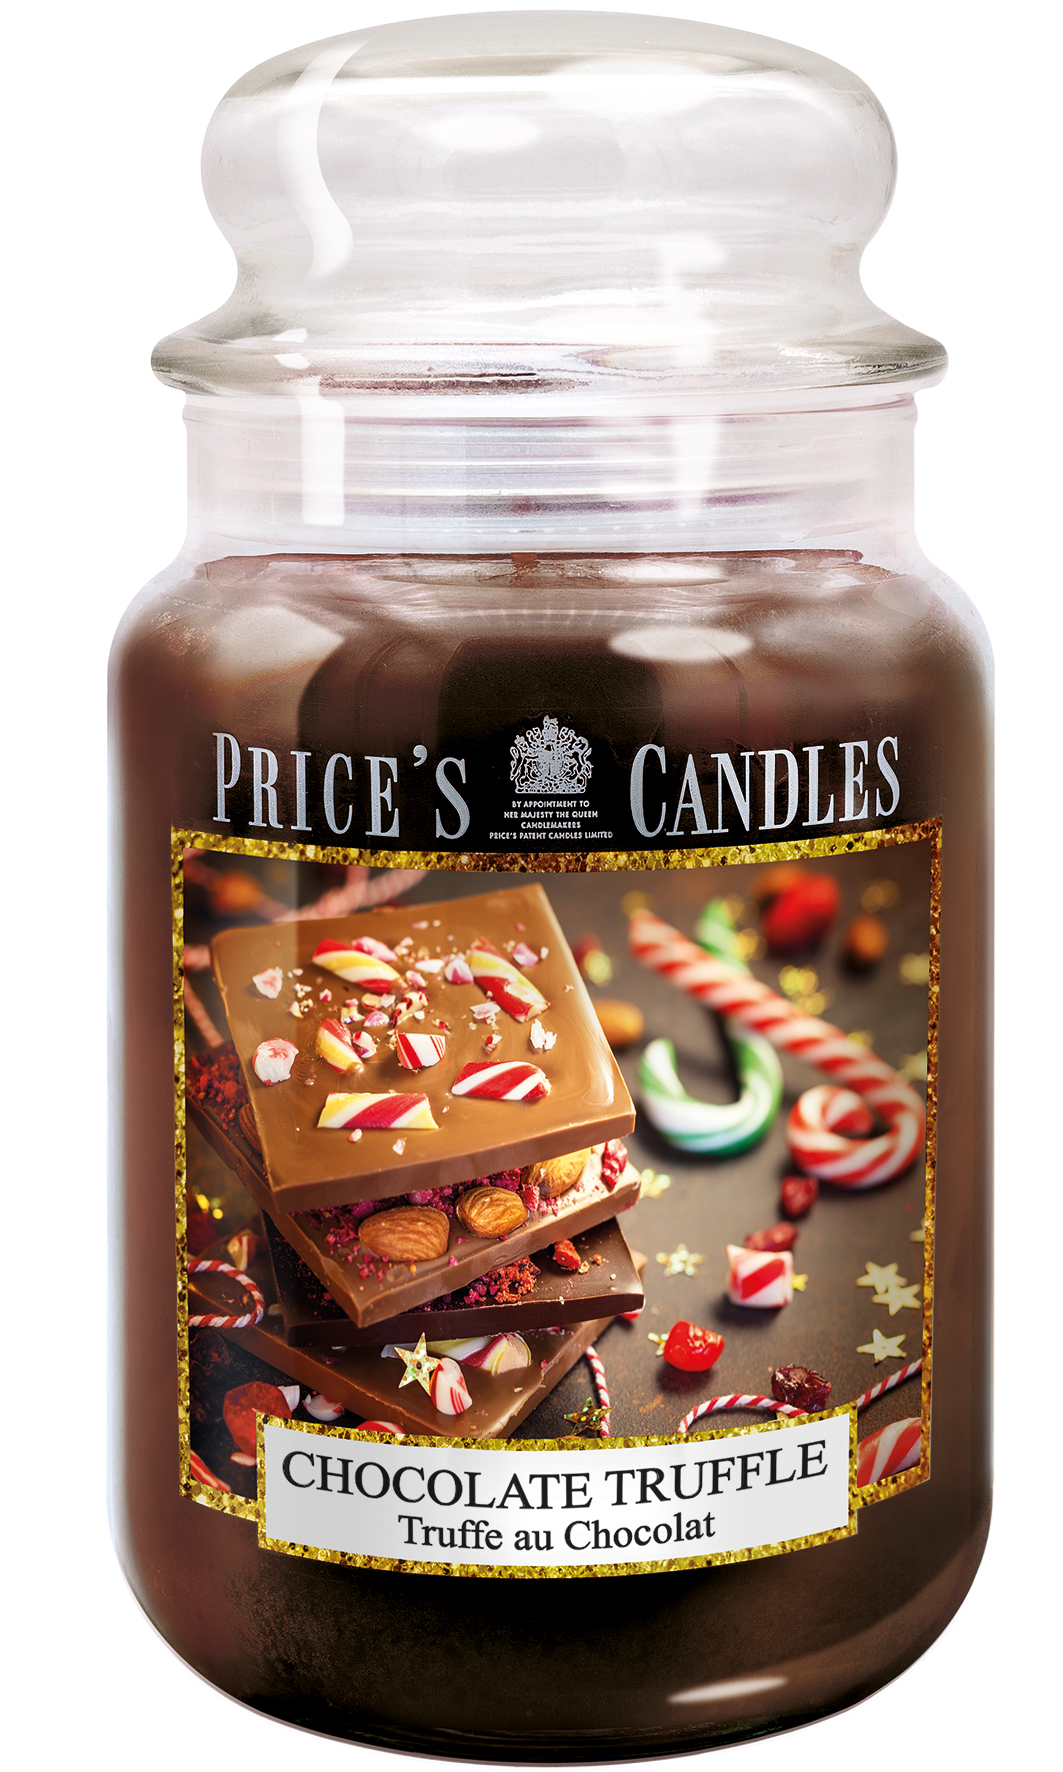 Prices Candle "Chocolate Truffle" 630g   